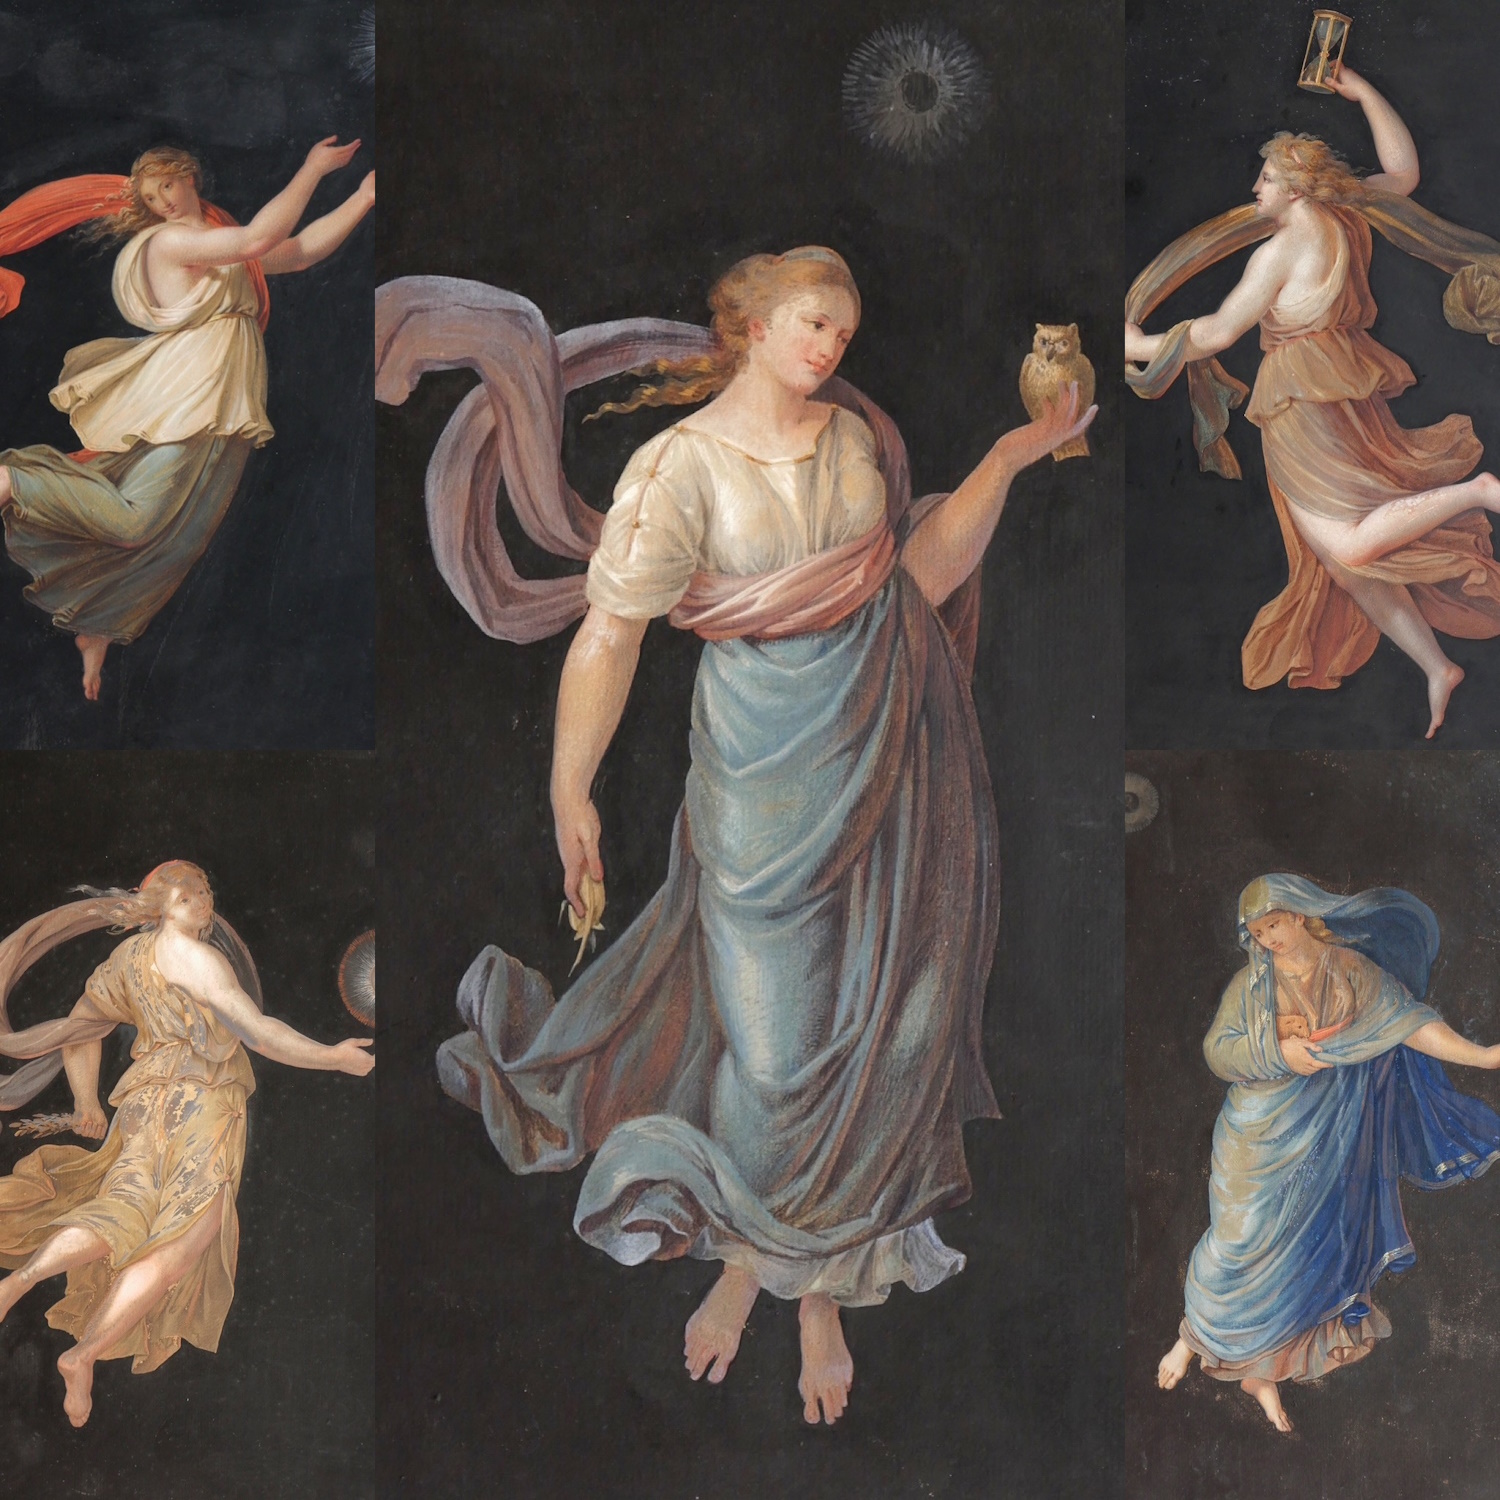 Attributed to Michelangelo Maestri (died c.1812) – ‘The Hours of Day and Night’